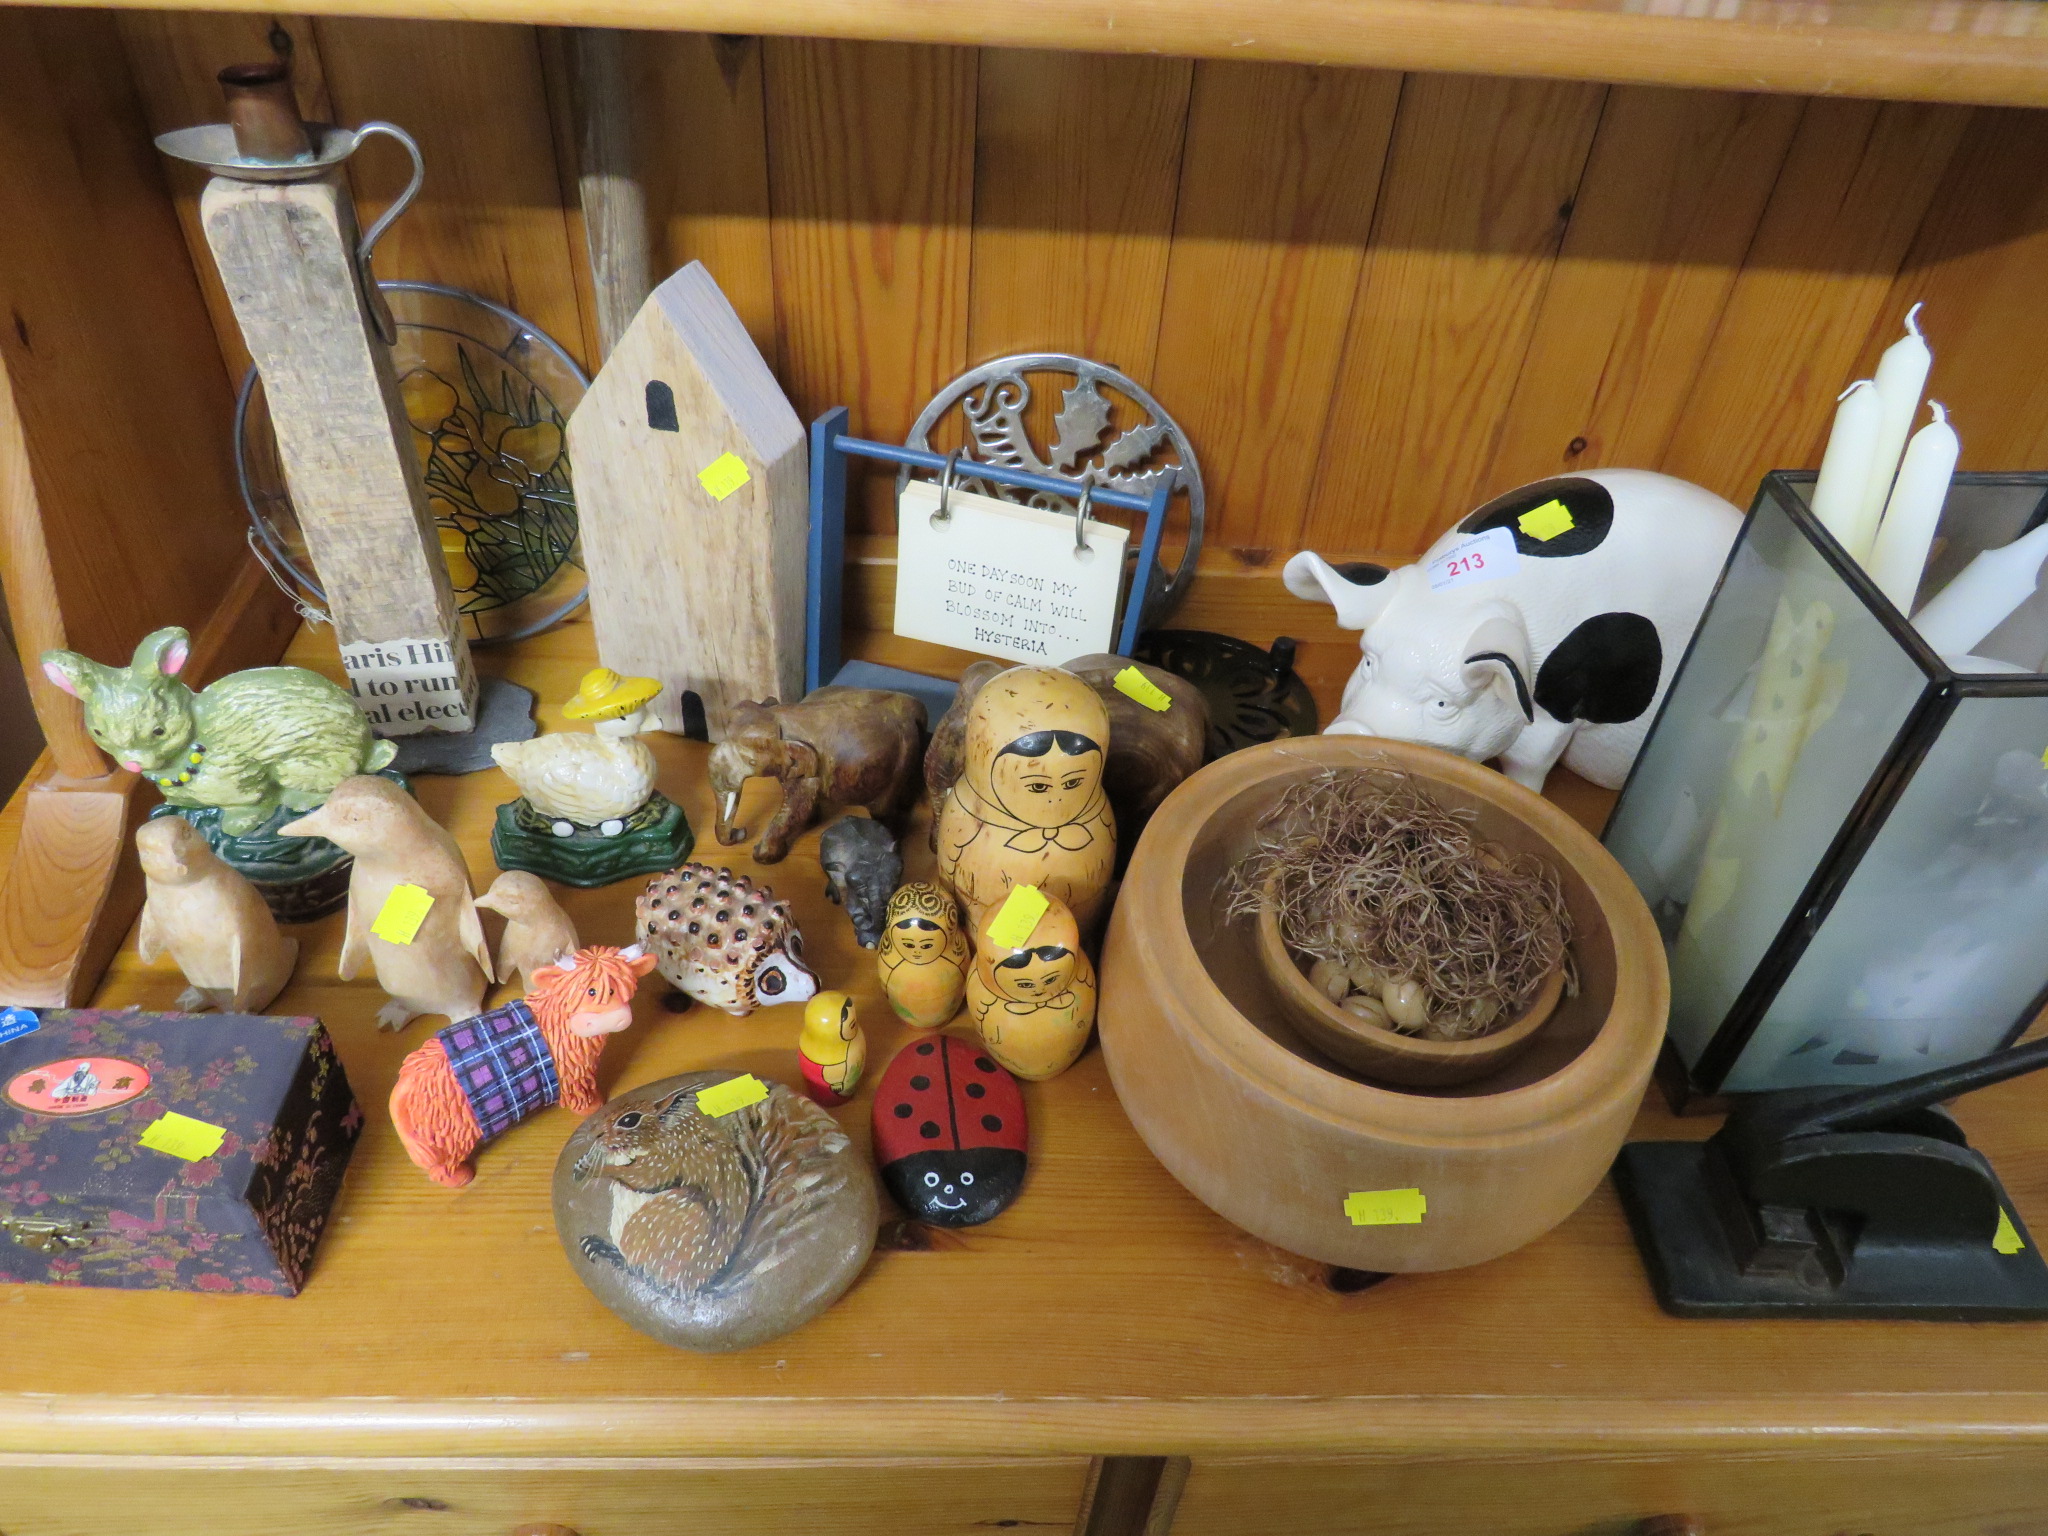 SELECTION OF DECORATIVE HOUSEHOLD ITEMS , INCLUDING CERAMIC PIG , WOODEN BOWLS AND OTHER ITEMS.